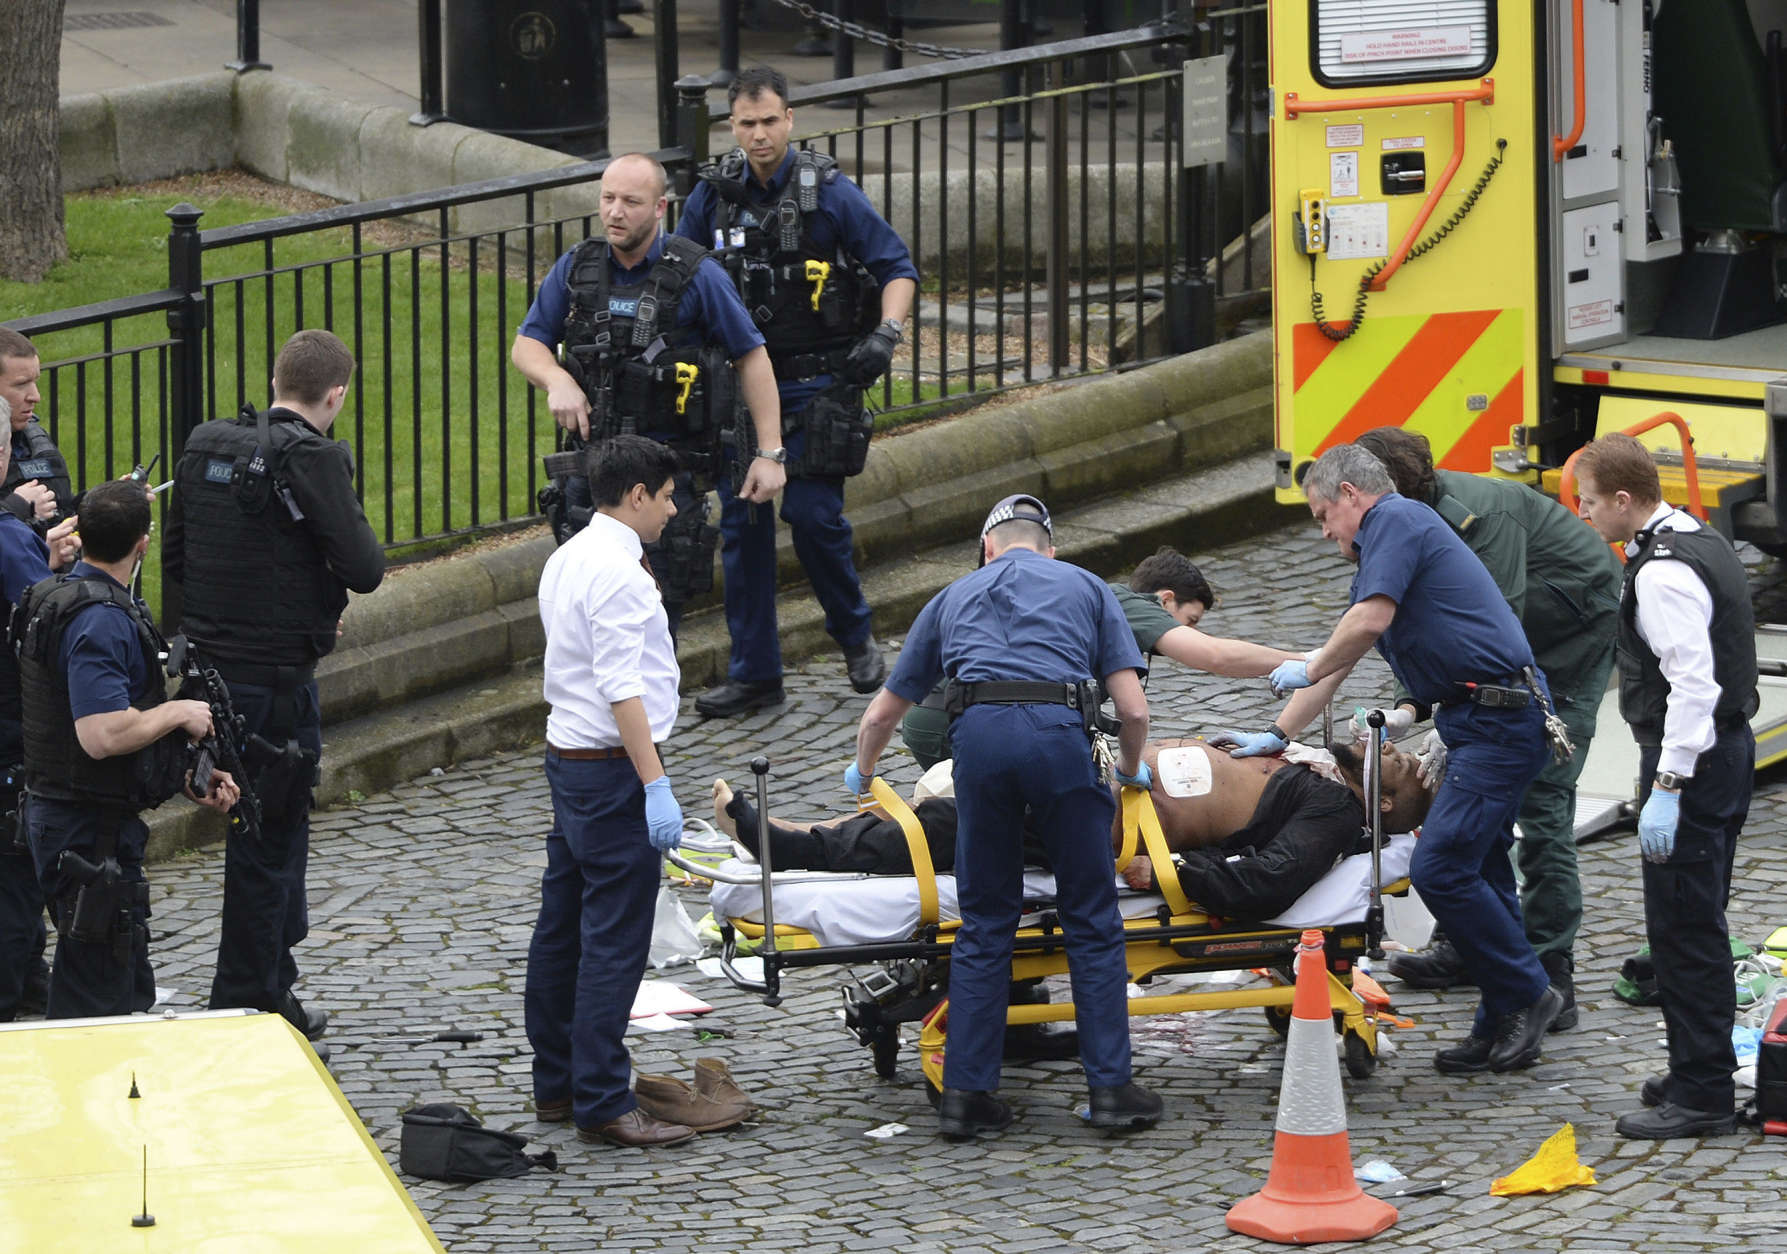 A man is treated by emergency services  as police look on at the scene outside the Houses of Parliament London, Wednesday, March 22, 2017.  London police say they are treating a gun and knife incident at Britain's Parliament "as a terrorist incident until we know otherwise." The Metropolitan Police says in a statement that the incident is ongoing. It is urging people to stay away from the area. Officials say a man with a knife attacked a police officer at Parliament and was shot by officers. Nearby, witnesses say a vehicle struck several people on the Westminster Bridge.  (Stefan Rousseau/PA via AP).